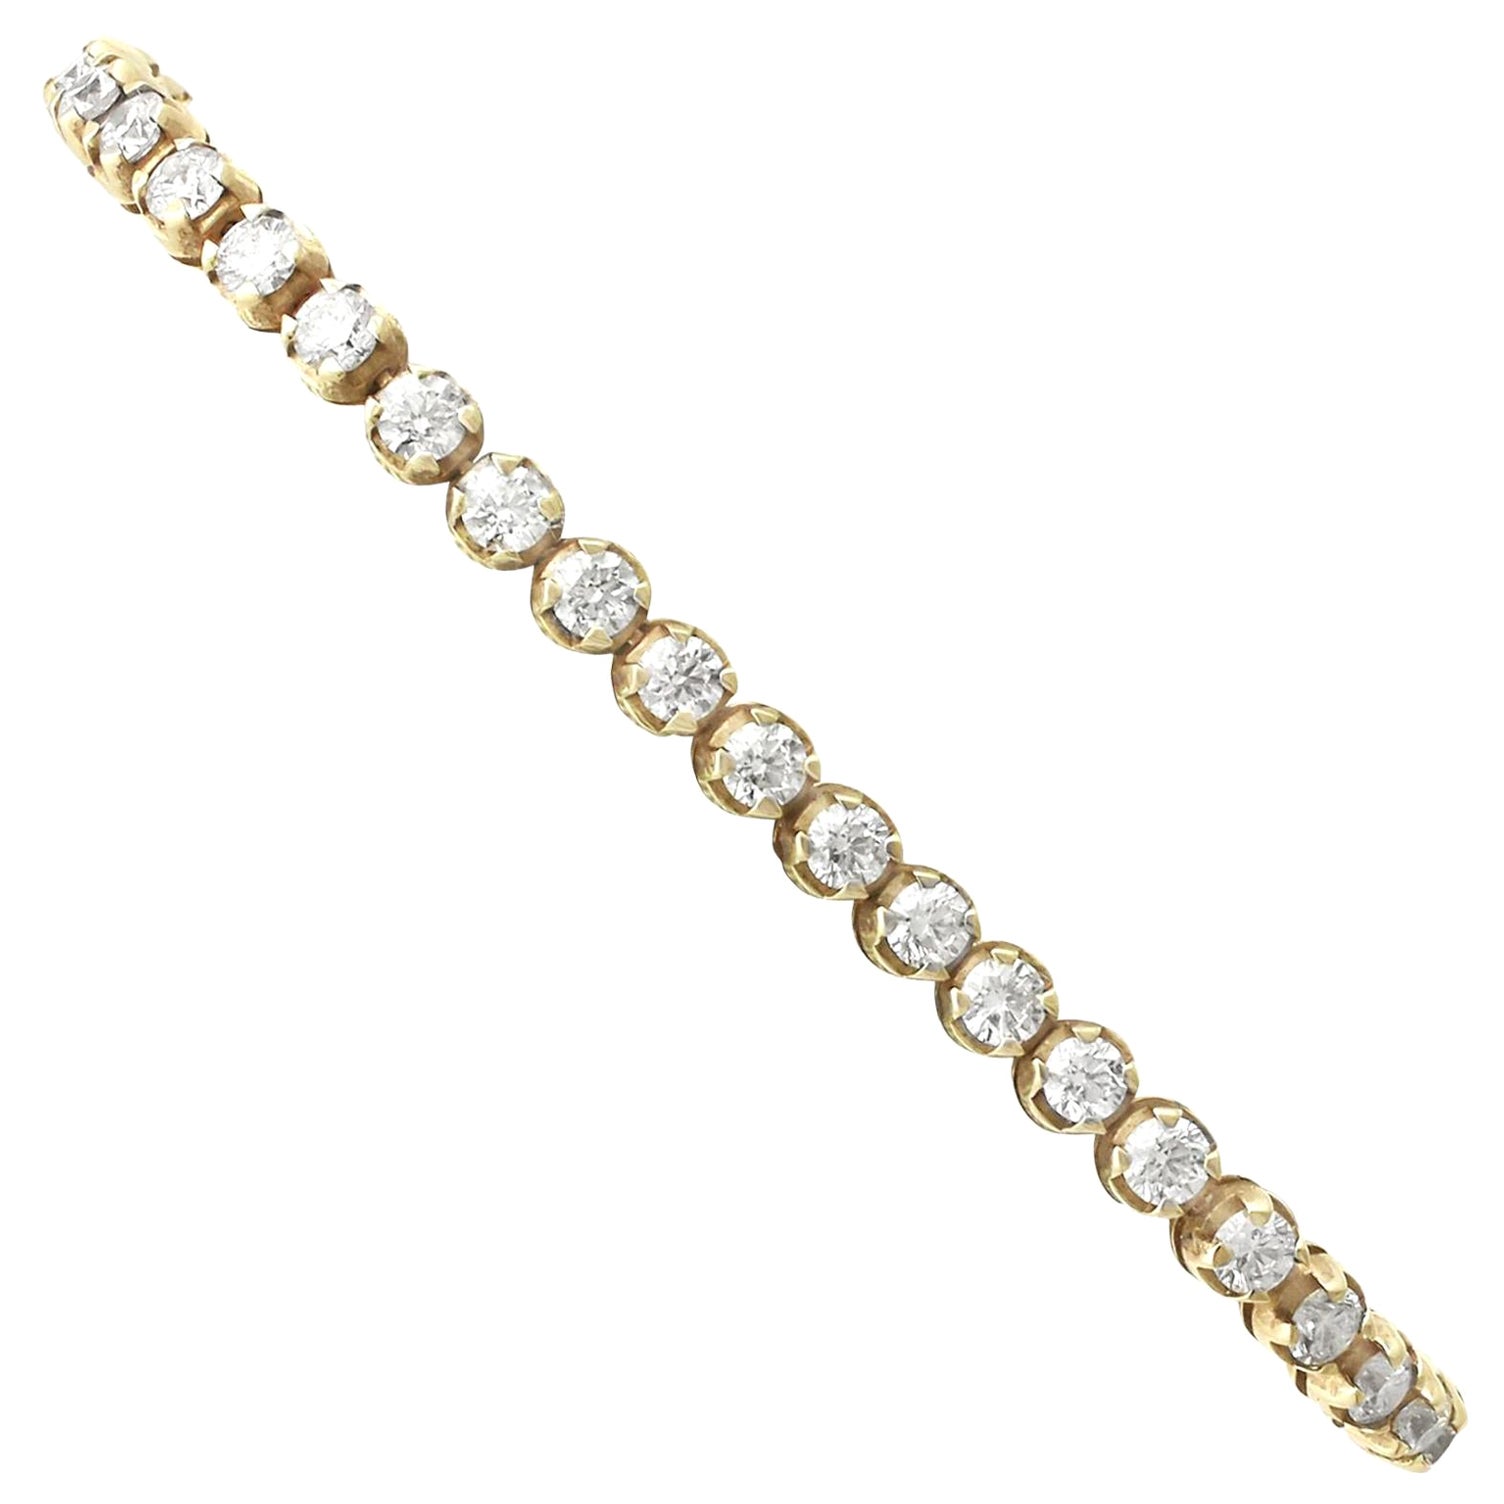 A fine and impressive contemporary 6.36 carat diamond and 18 karat yellow gold tennis bracelet; part of our diverse diamond jewelry collection.

This fine and impressive ladies diamond tennis bracelet has been crafted in 18k yellow gold.

The gold